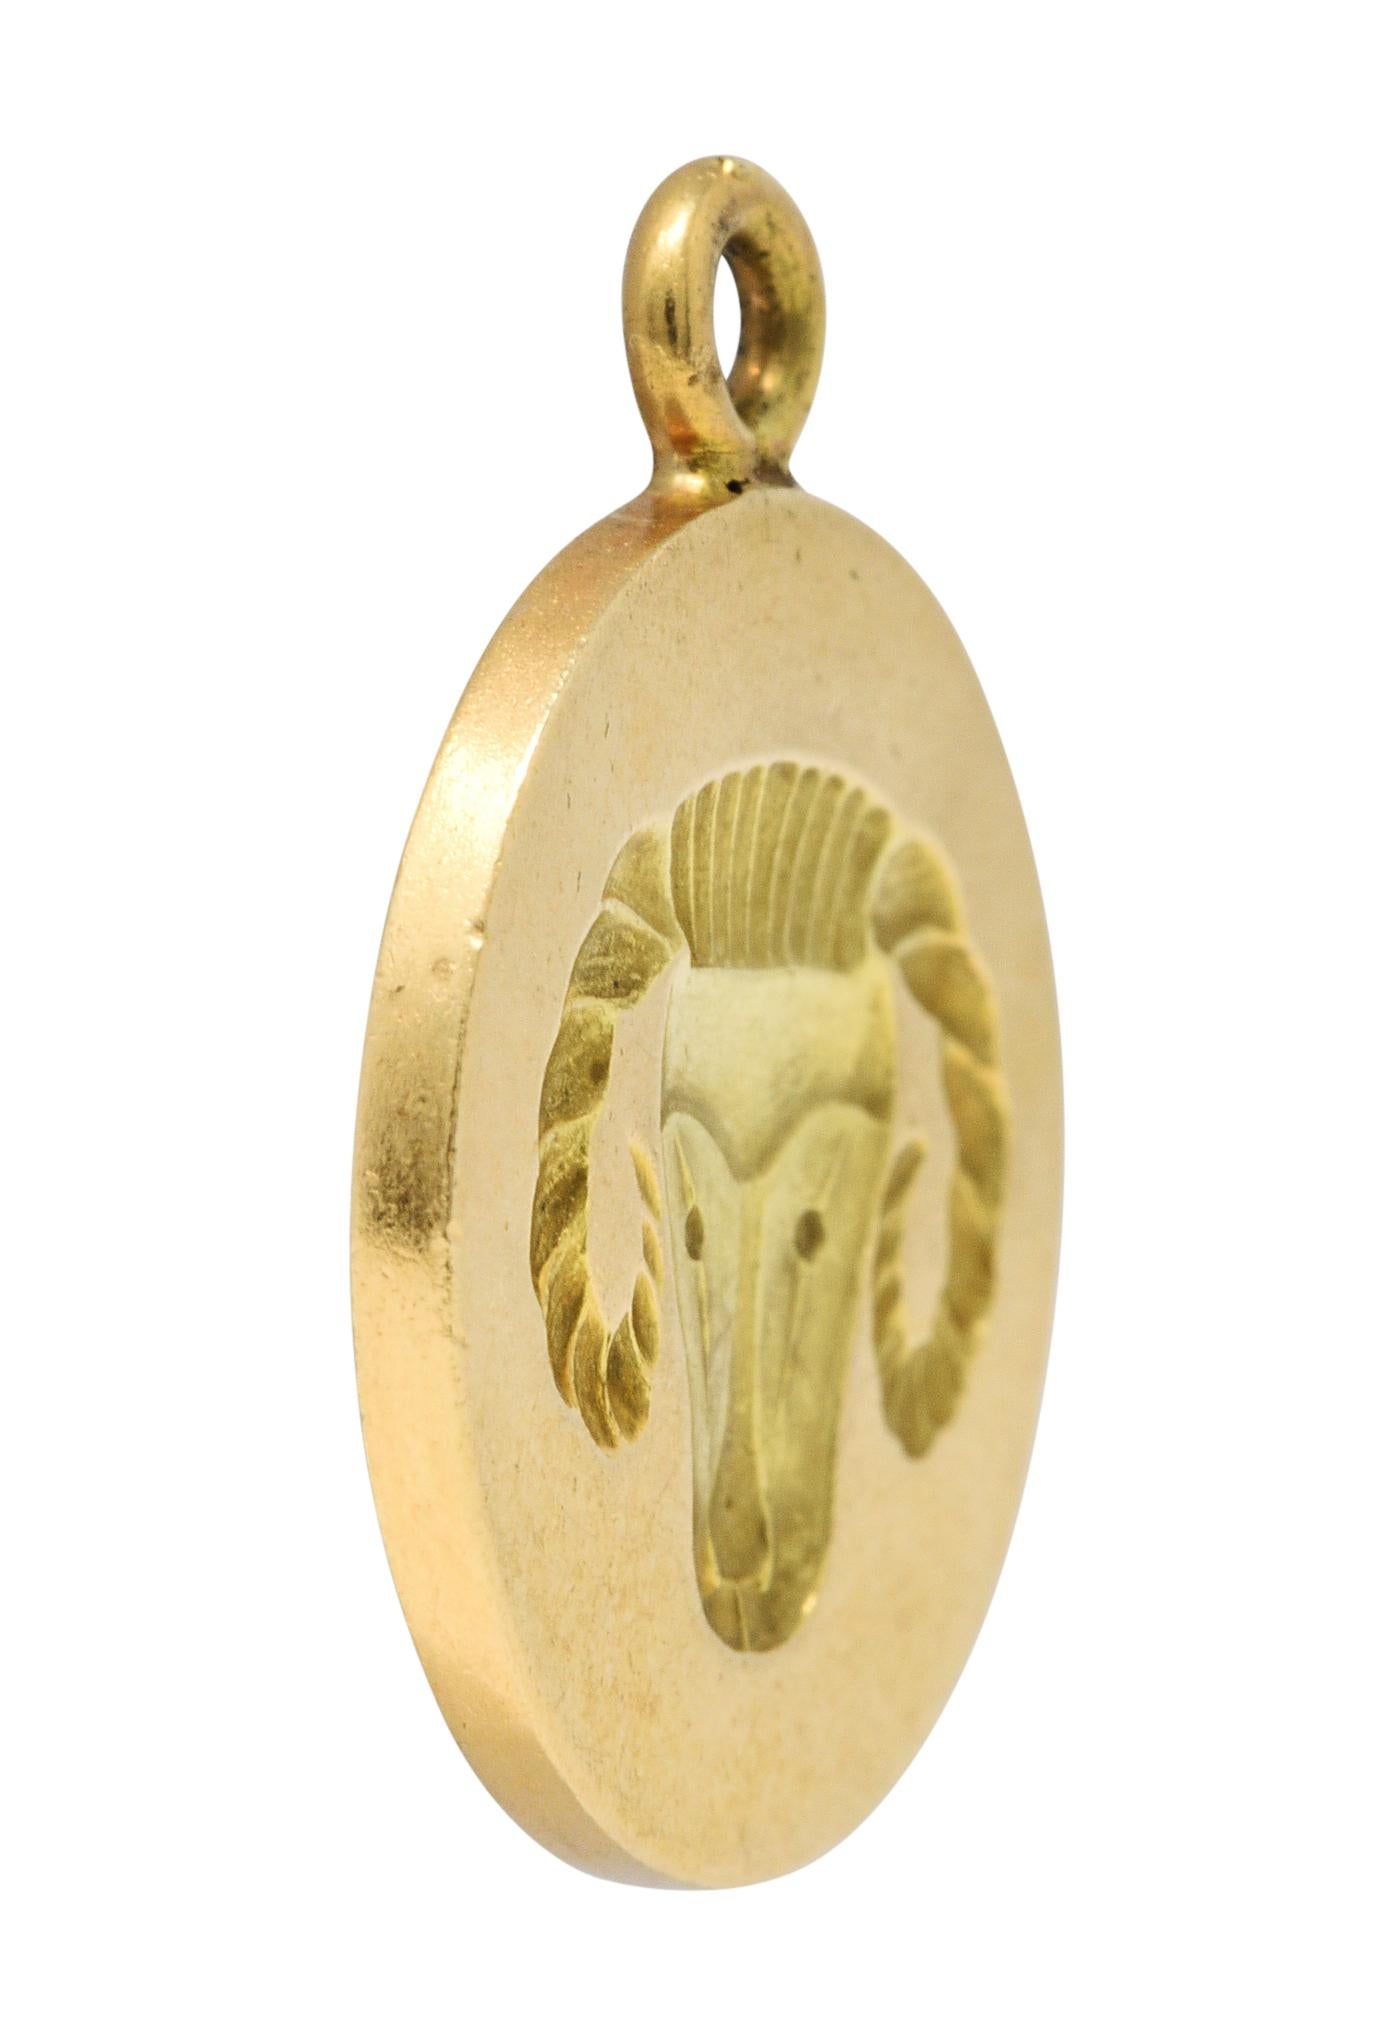 Circular charm features a deeply recessed impression of a ram

With twisted horns, a ridged crown, and a stylized face

Back is emblazoned with the Aries symbol and maker's mark

Stamped for Larter & Sons and 14 karat gold

Circa: 1960s

Measures: